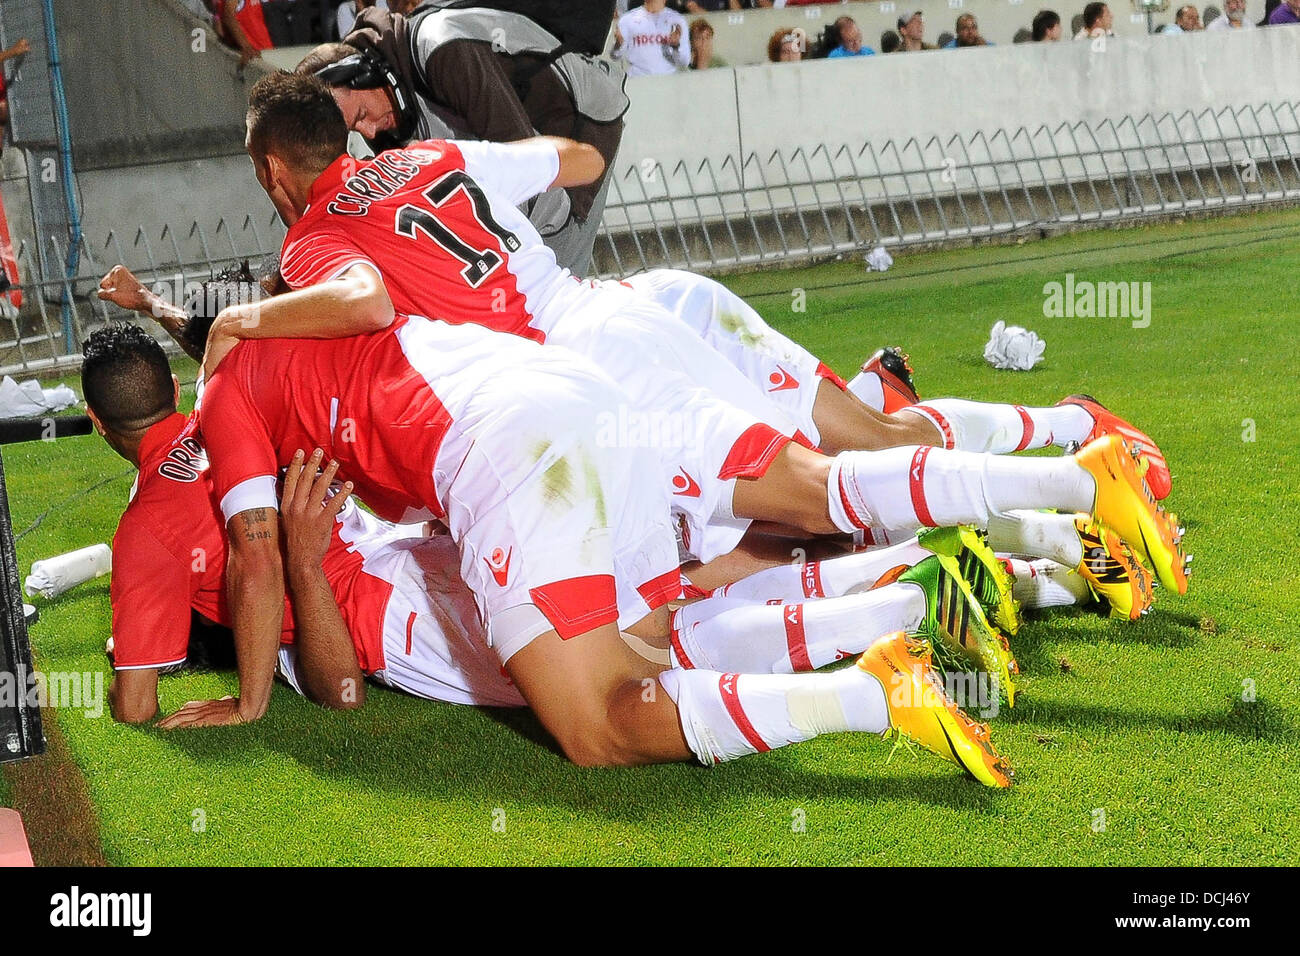 18.08.2013 Monaco. Monaco players celebrate during the French Ligue 1 game between Monaco and Montpellier from the Stade Louis II stadium. Stock Photo